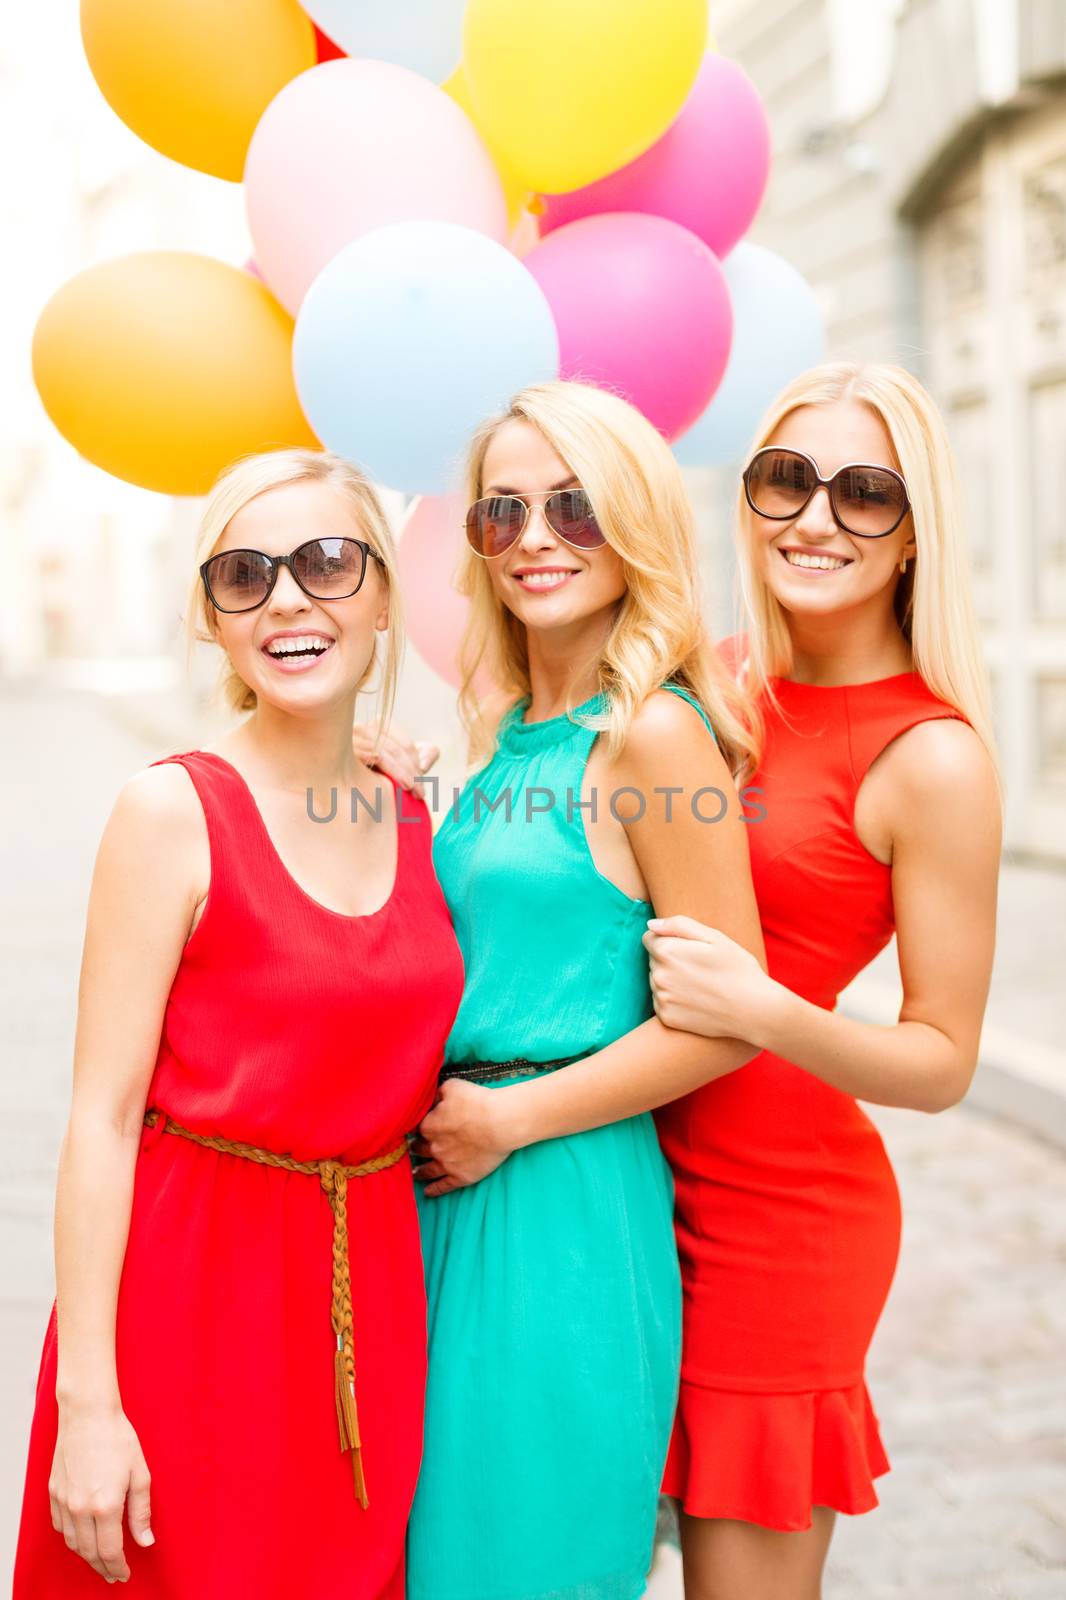 beautiful girls with colorful balloons in the city by dolgachov